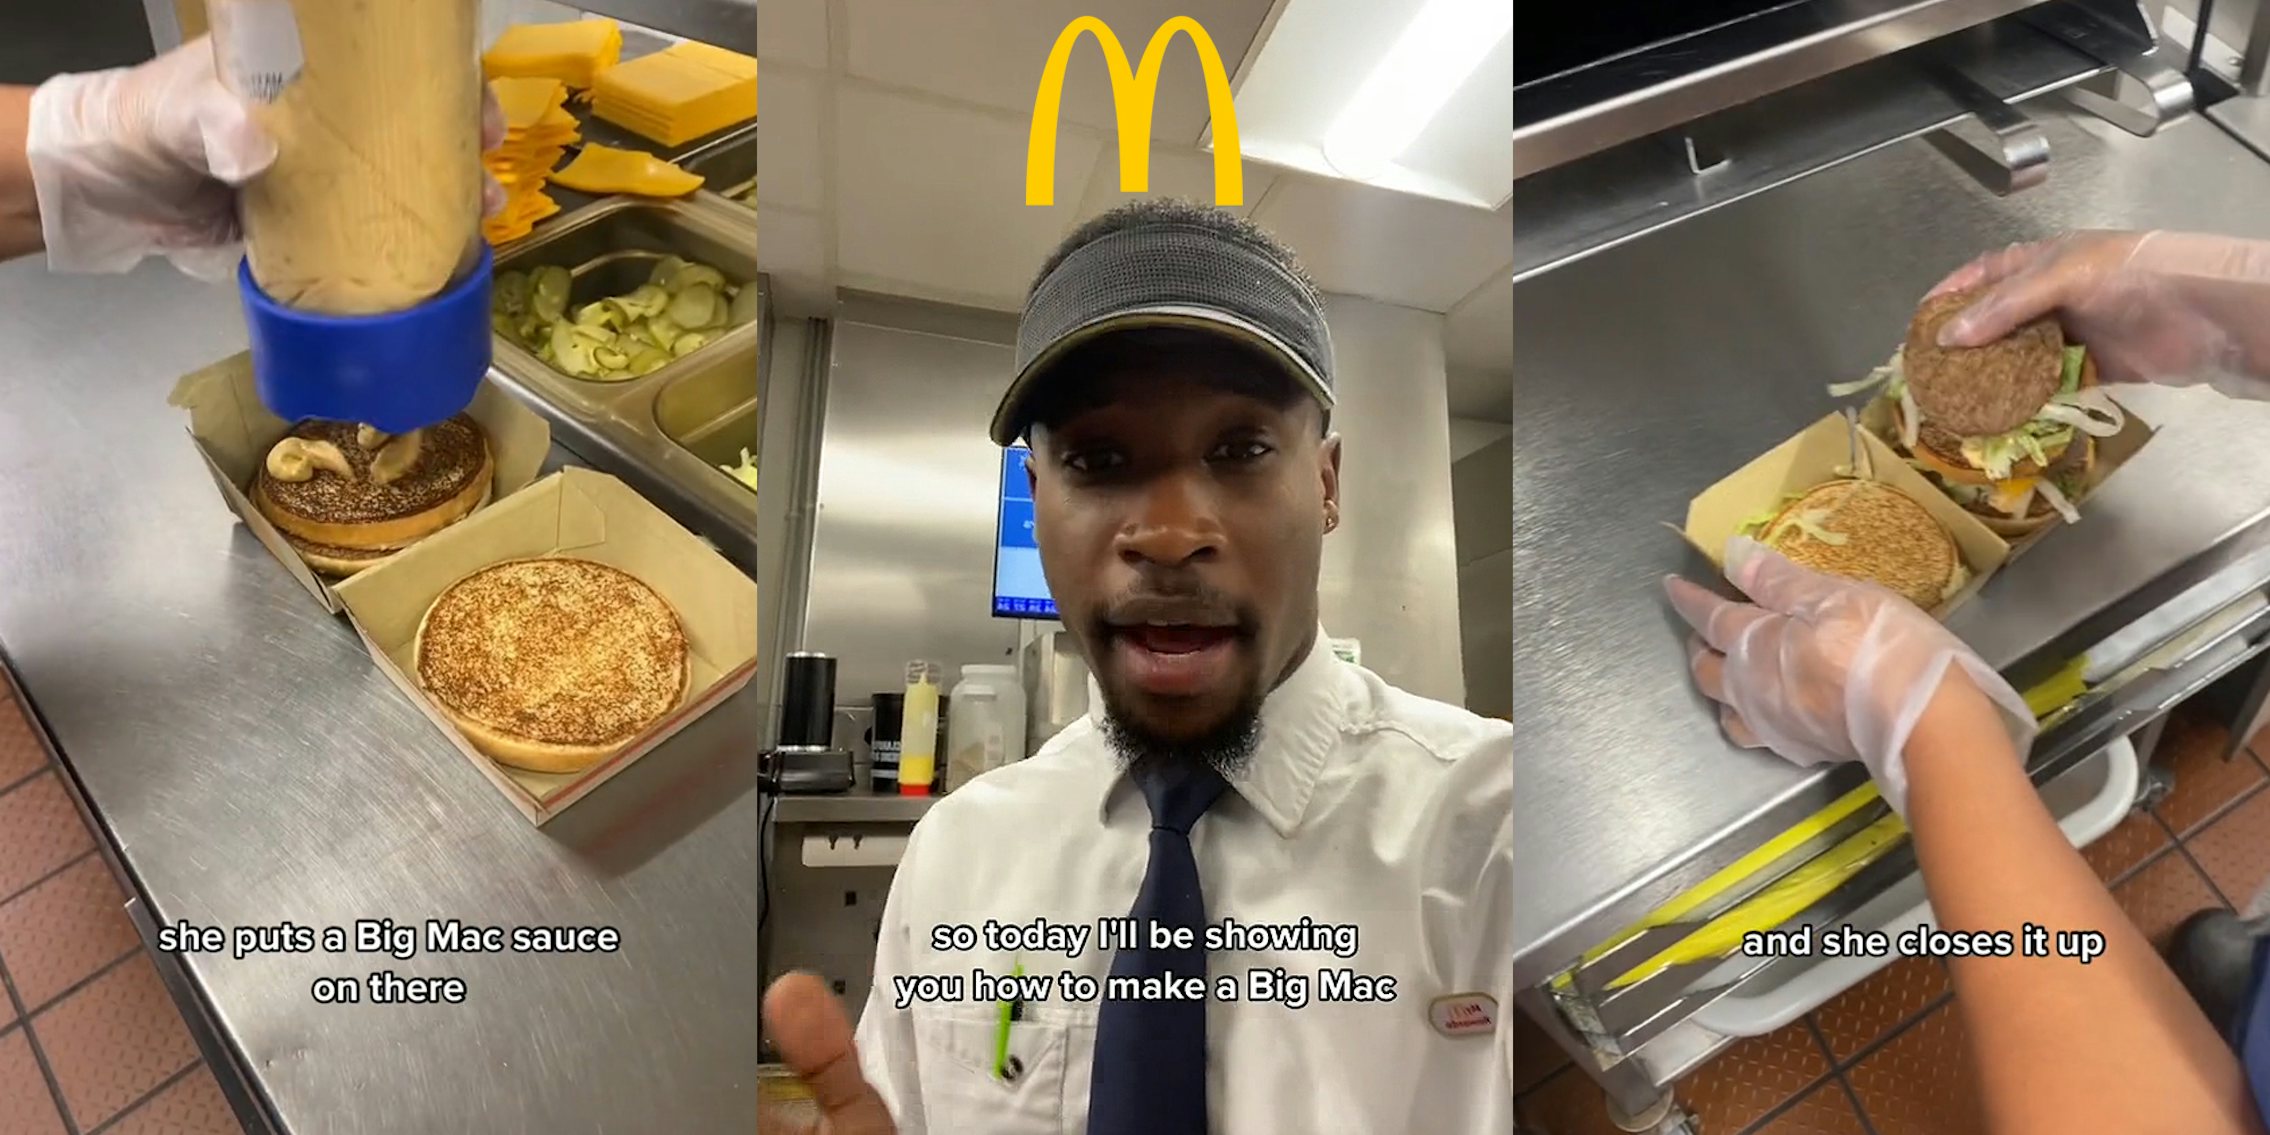 McDonald's employee putting sauce on buns caption 'she puts Big Mac sauce on there' (l) McDonald's employee speaking caption 'so today I'll be showing you how to make a Big Mac' with McDonald's M logo above (c) McDonald's employee putting Big Mac together caption 'and she closes it up' (r)